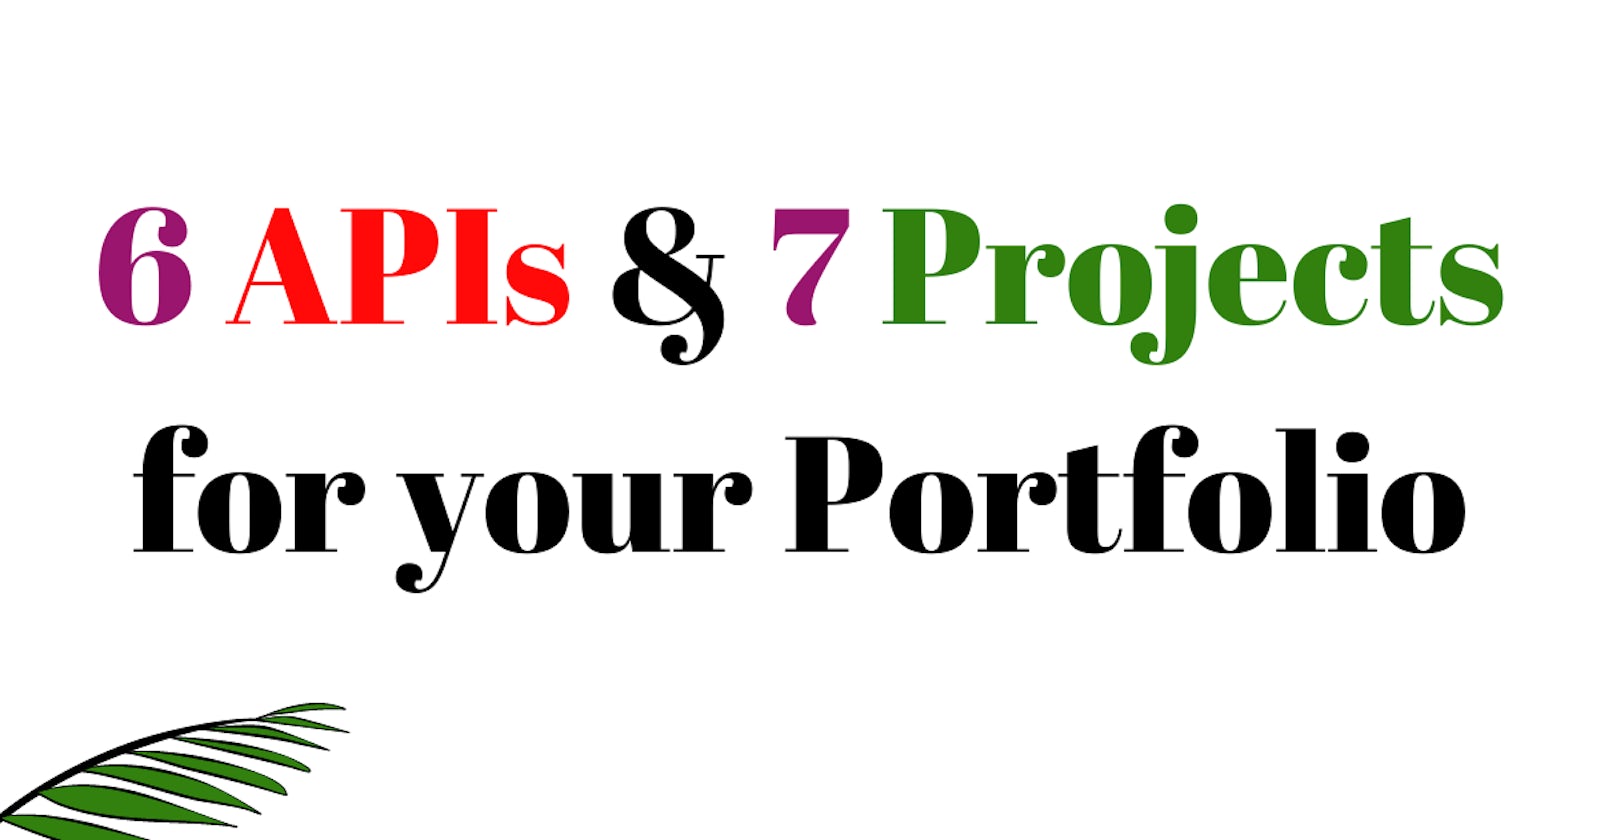 6 APIs & 7 Projects for your portfolio